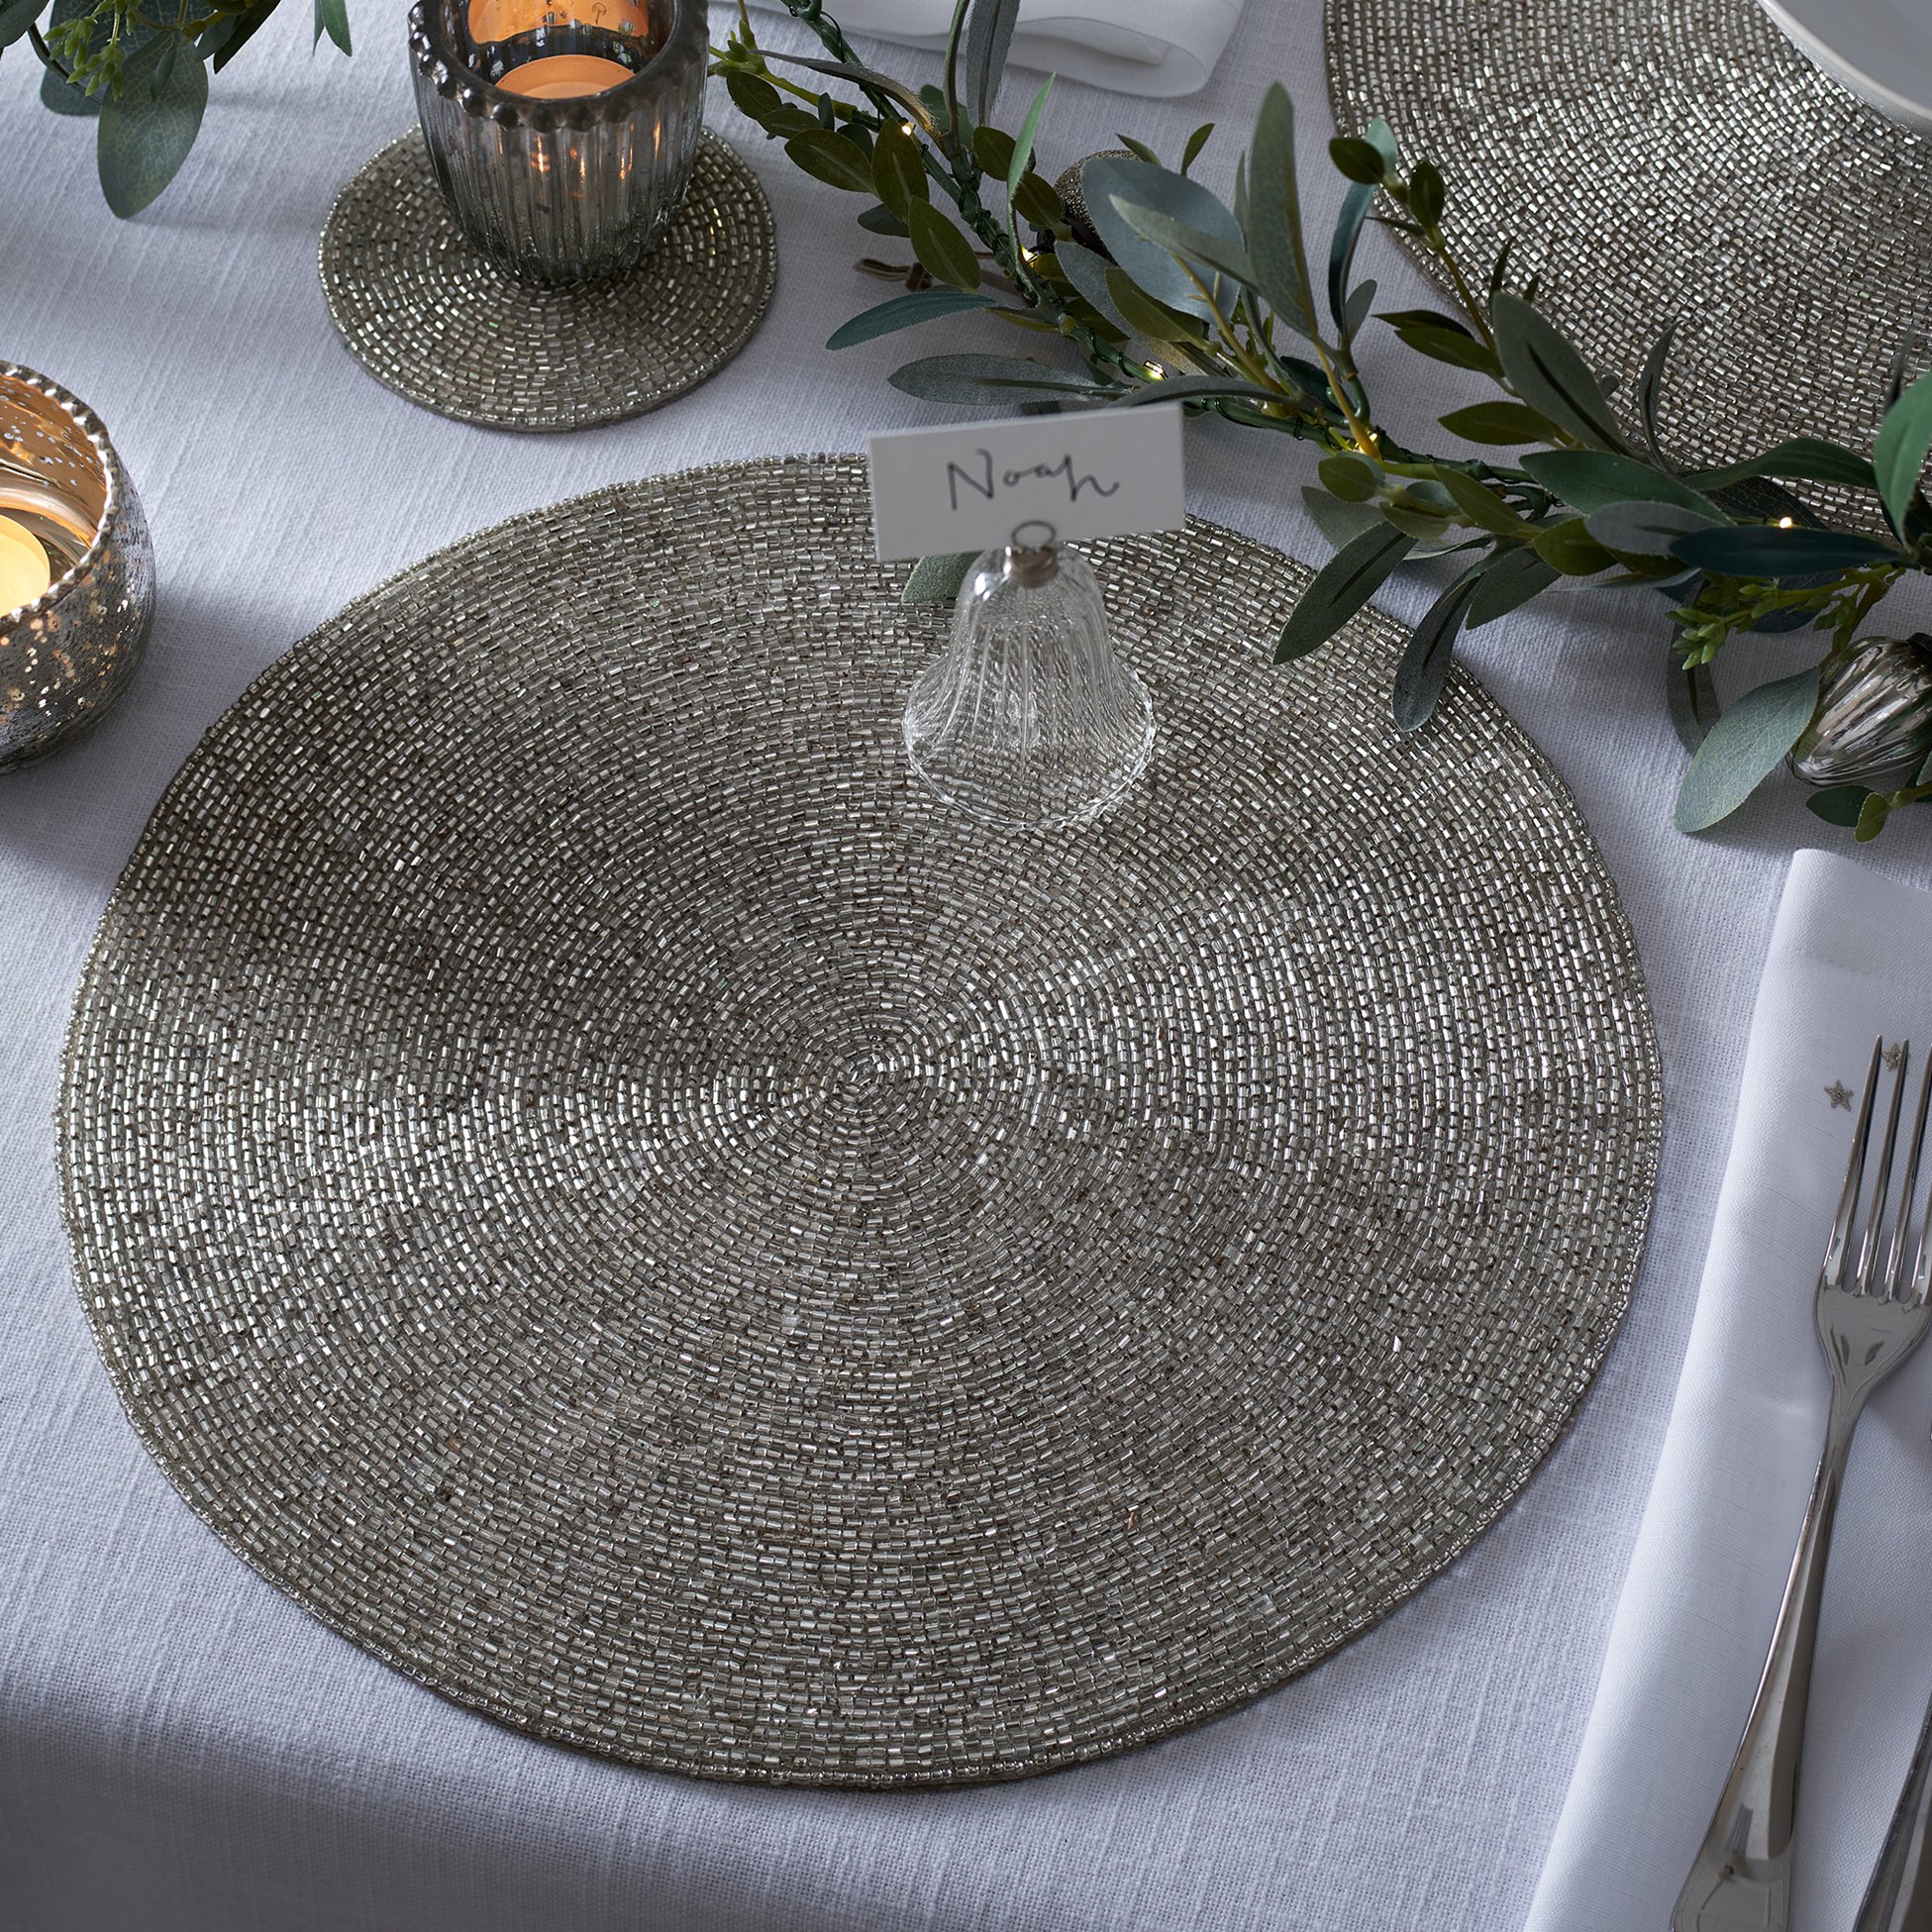 Round Beaded Placemats Set Of 2, Silver Beaded Round Placemats